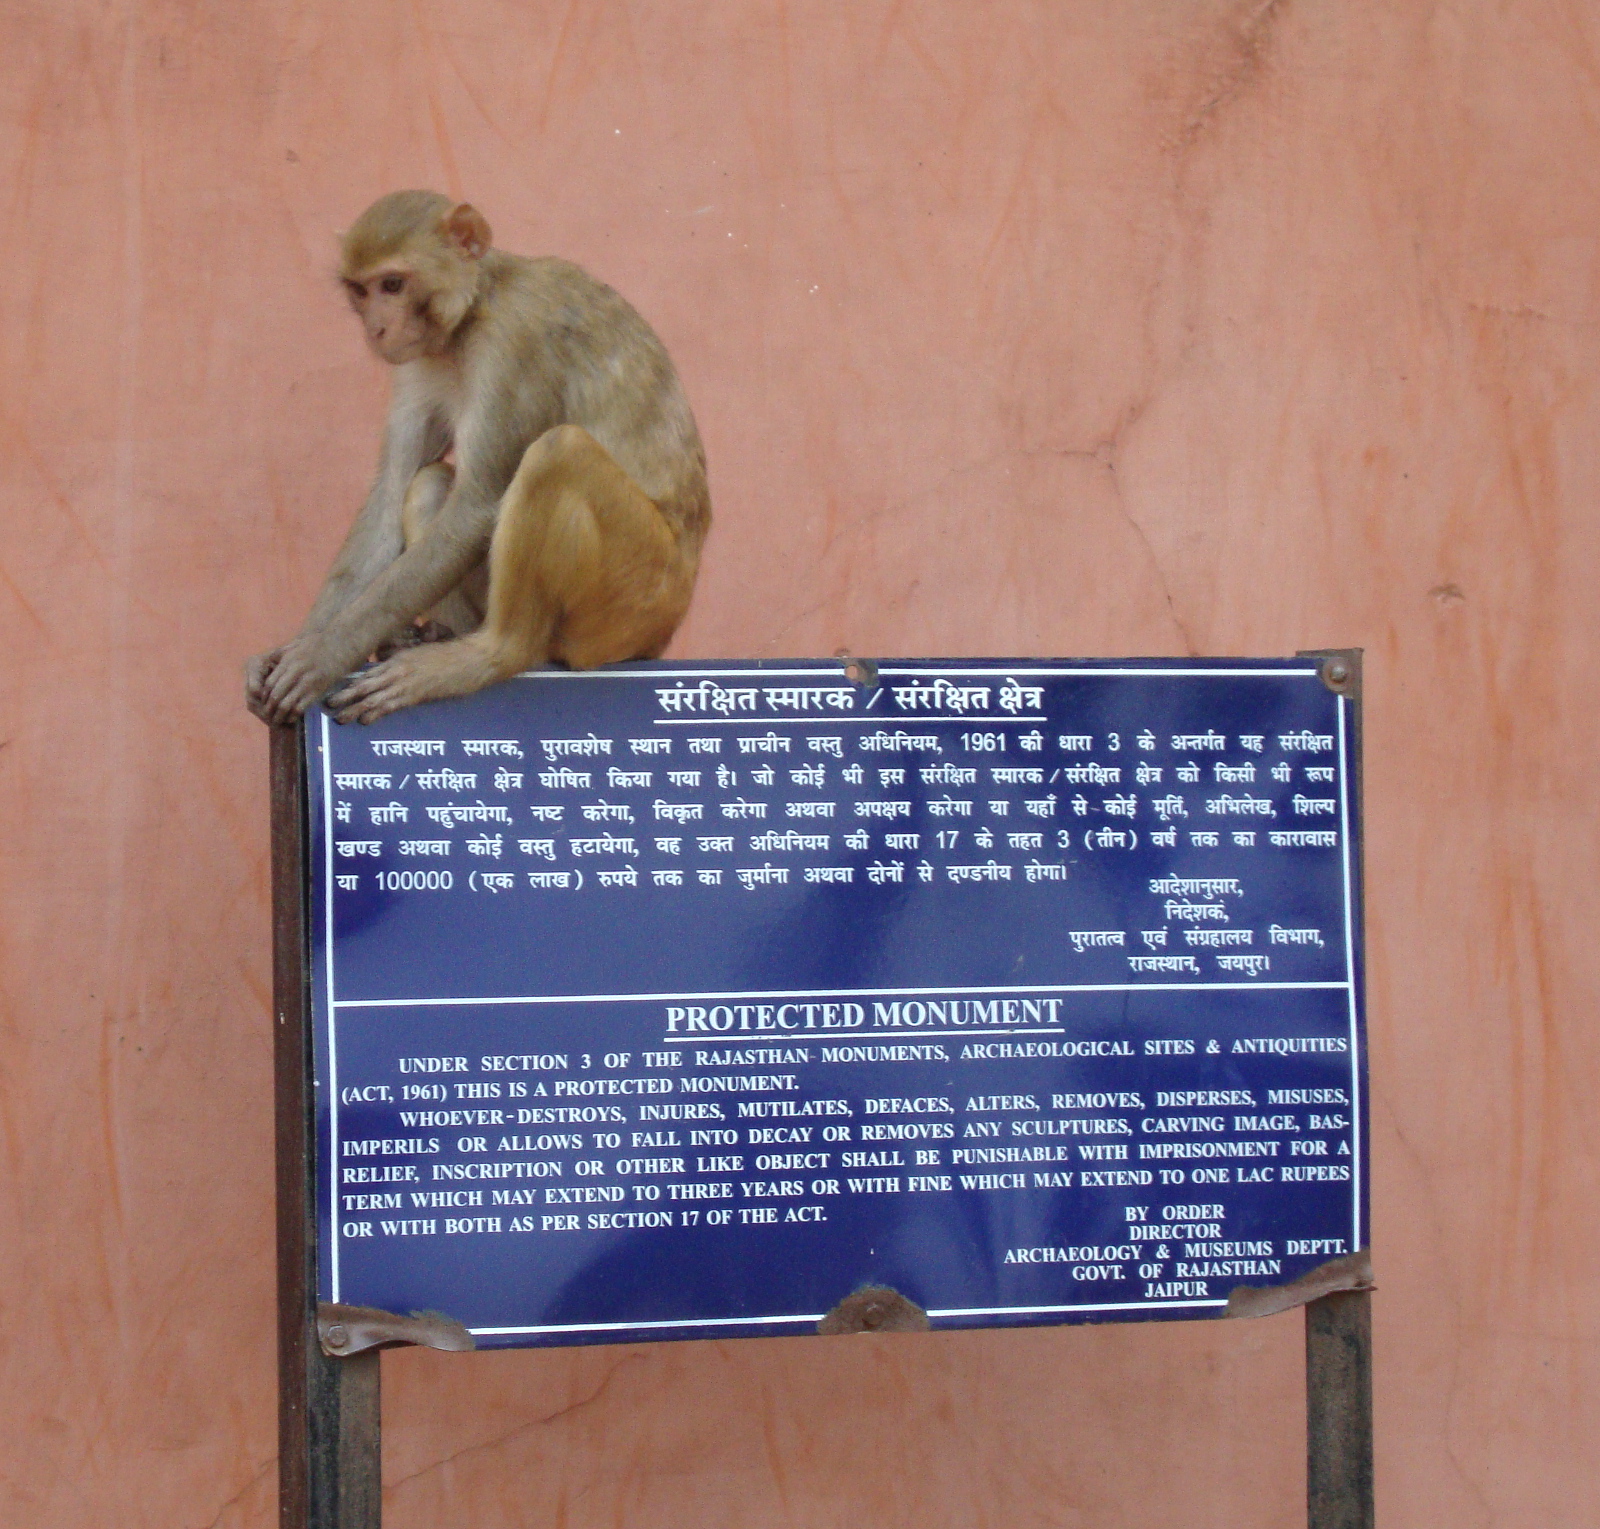 A rhesus macaque sits on a sign identifying the Sun Temple at Galta-ji (Jaipur) as a Rajasthan state protected monument.